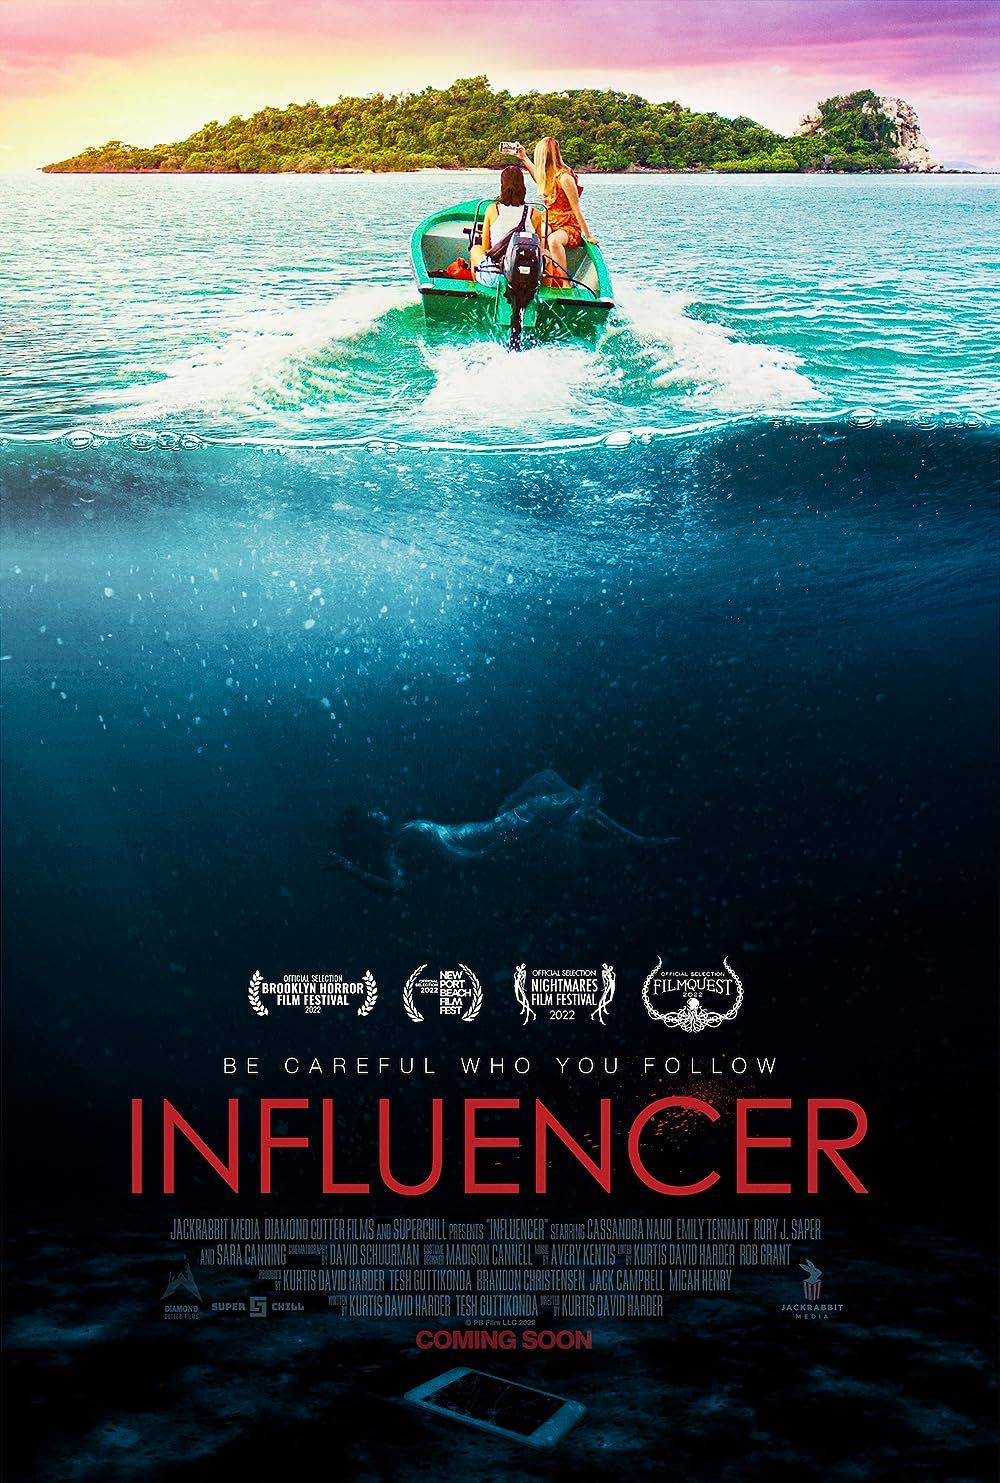 Madison and CW on a Boat with a Body Floating Underneath on the Influencer Poster